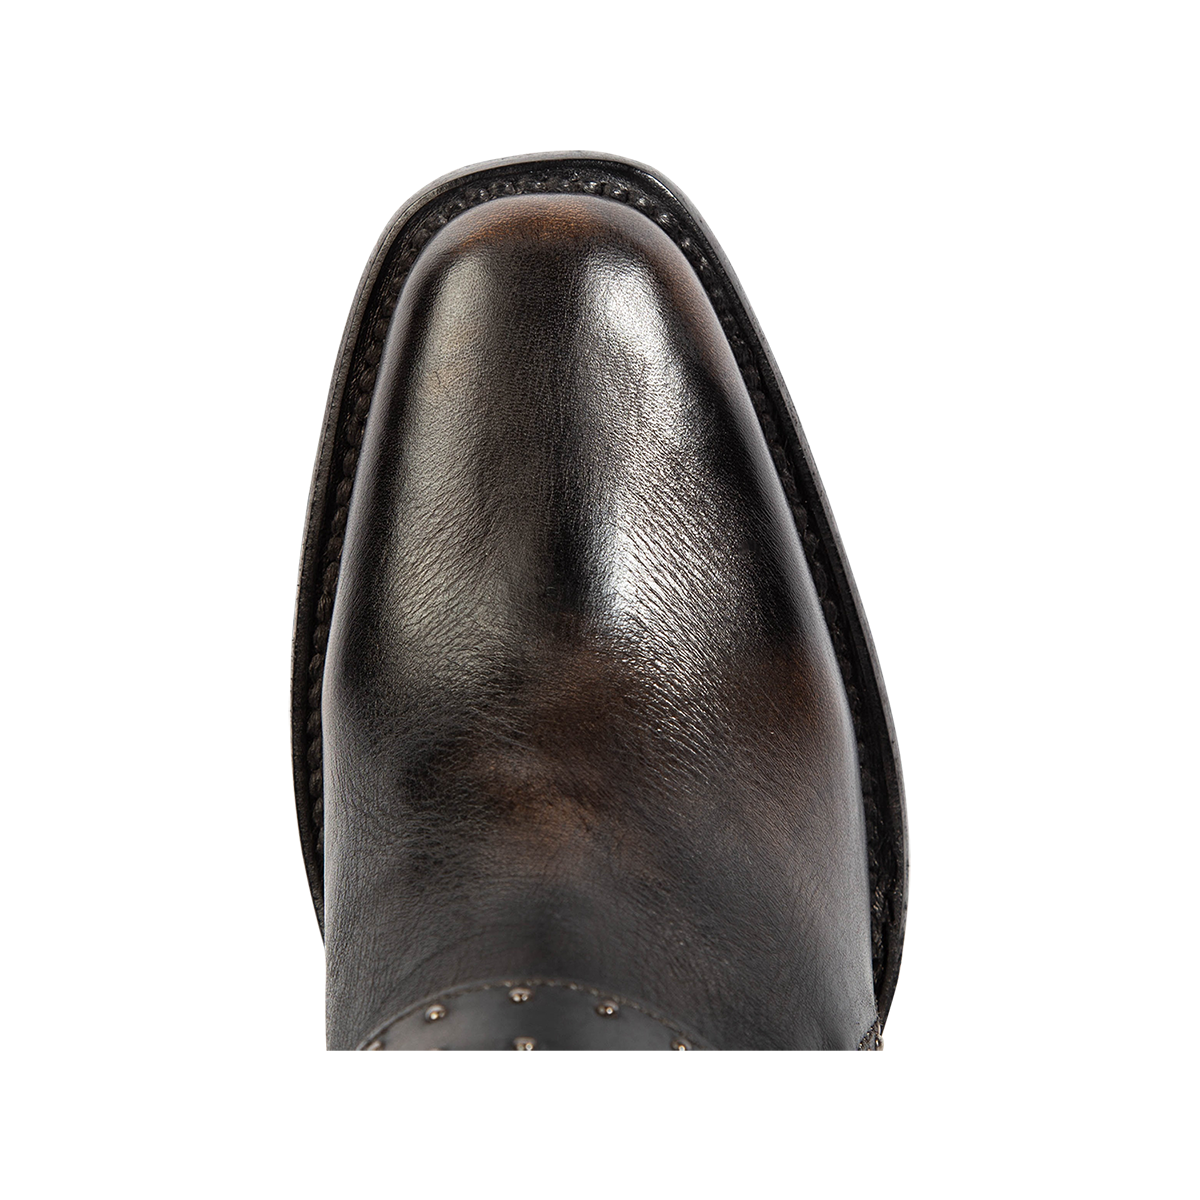 Top view showing square toe construction and a Goodyear welt on FREEBIRD women's Patsy black leather bootie